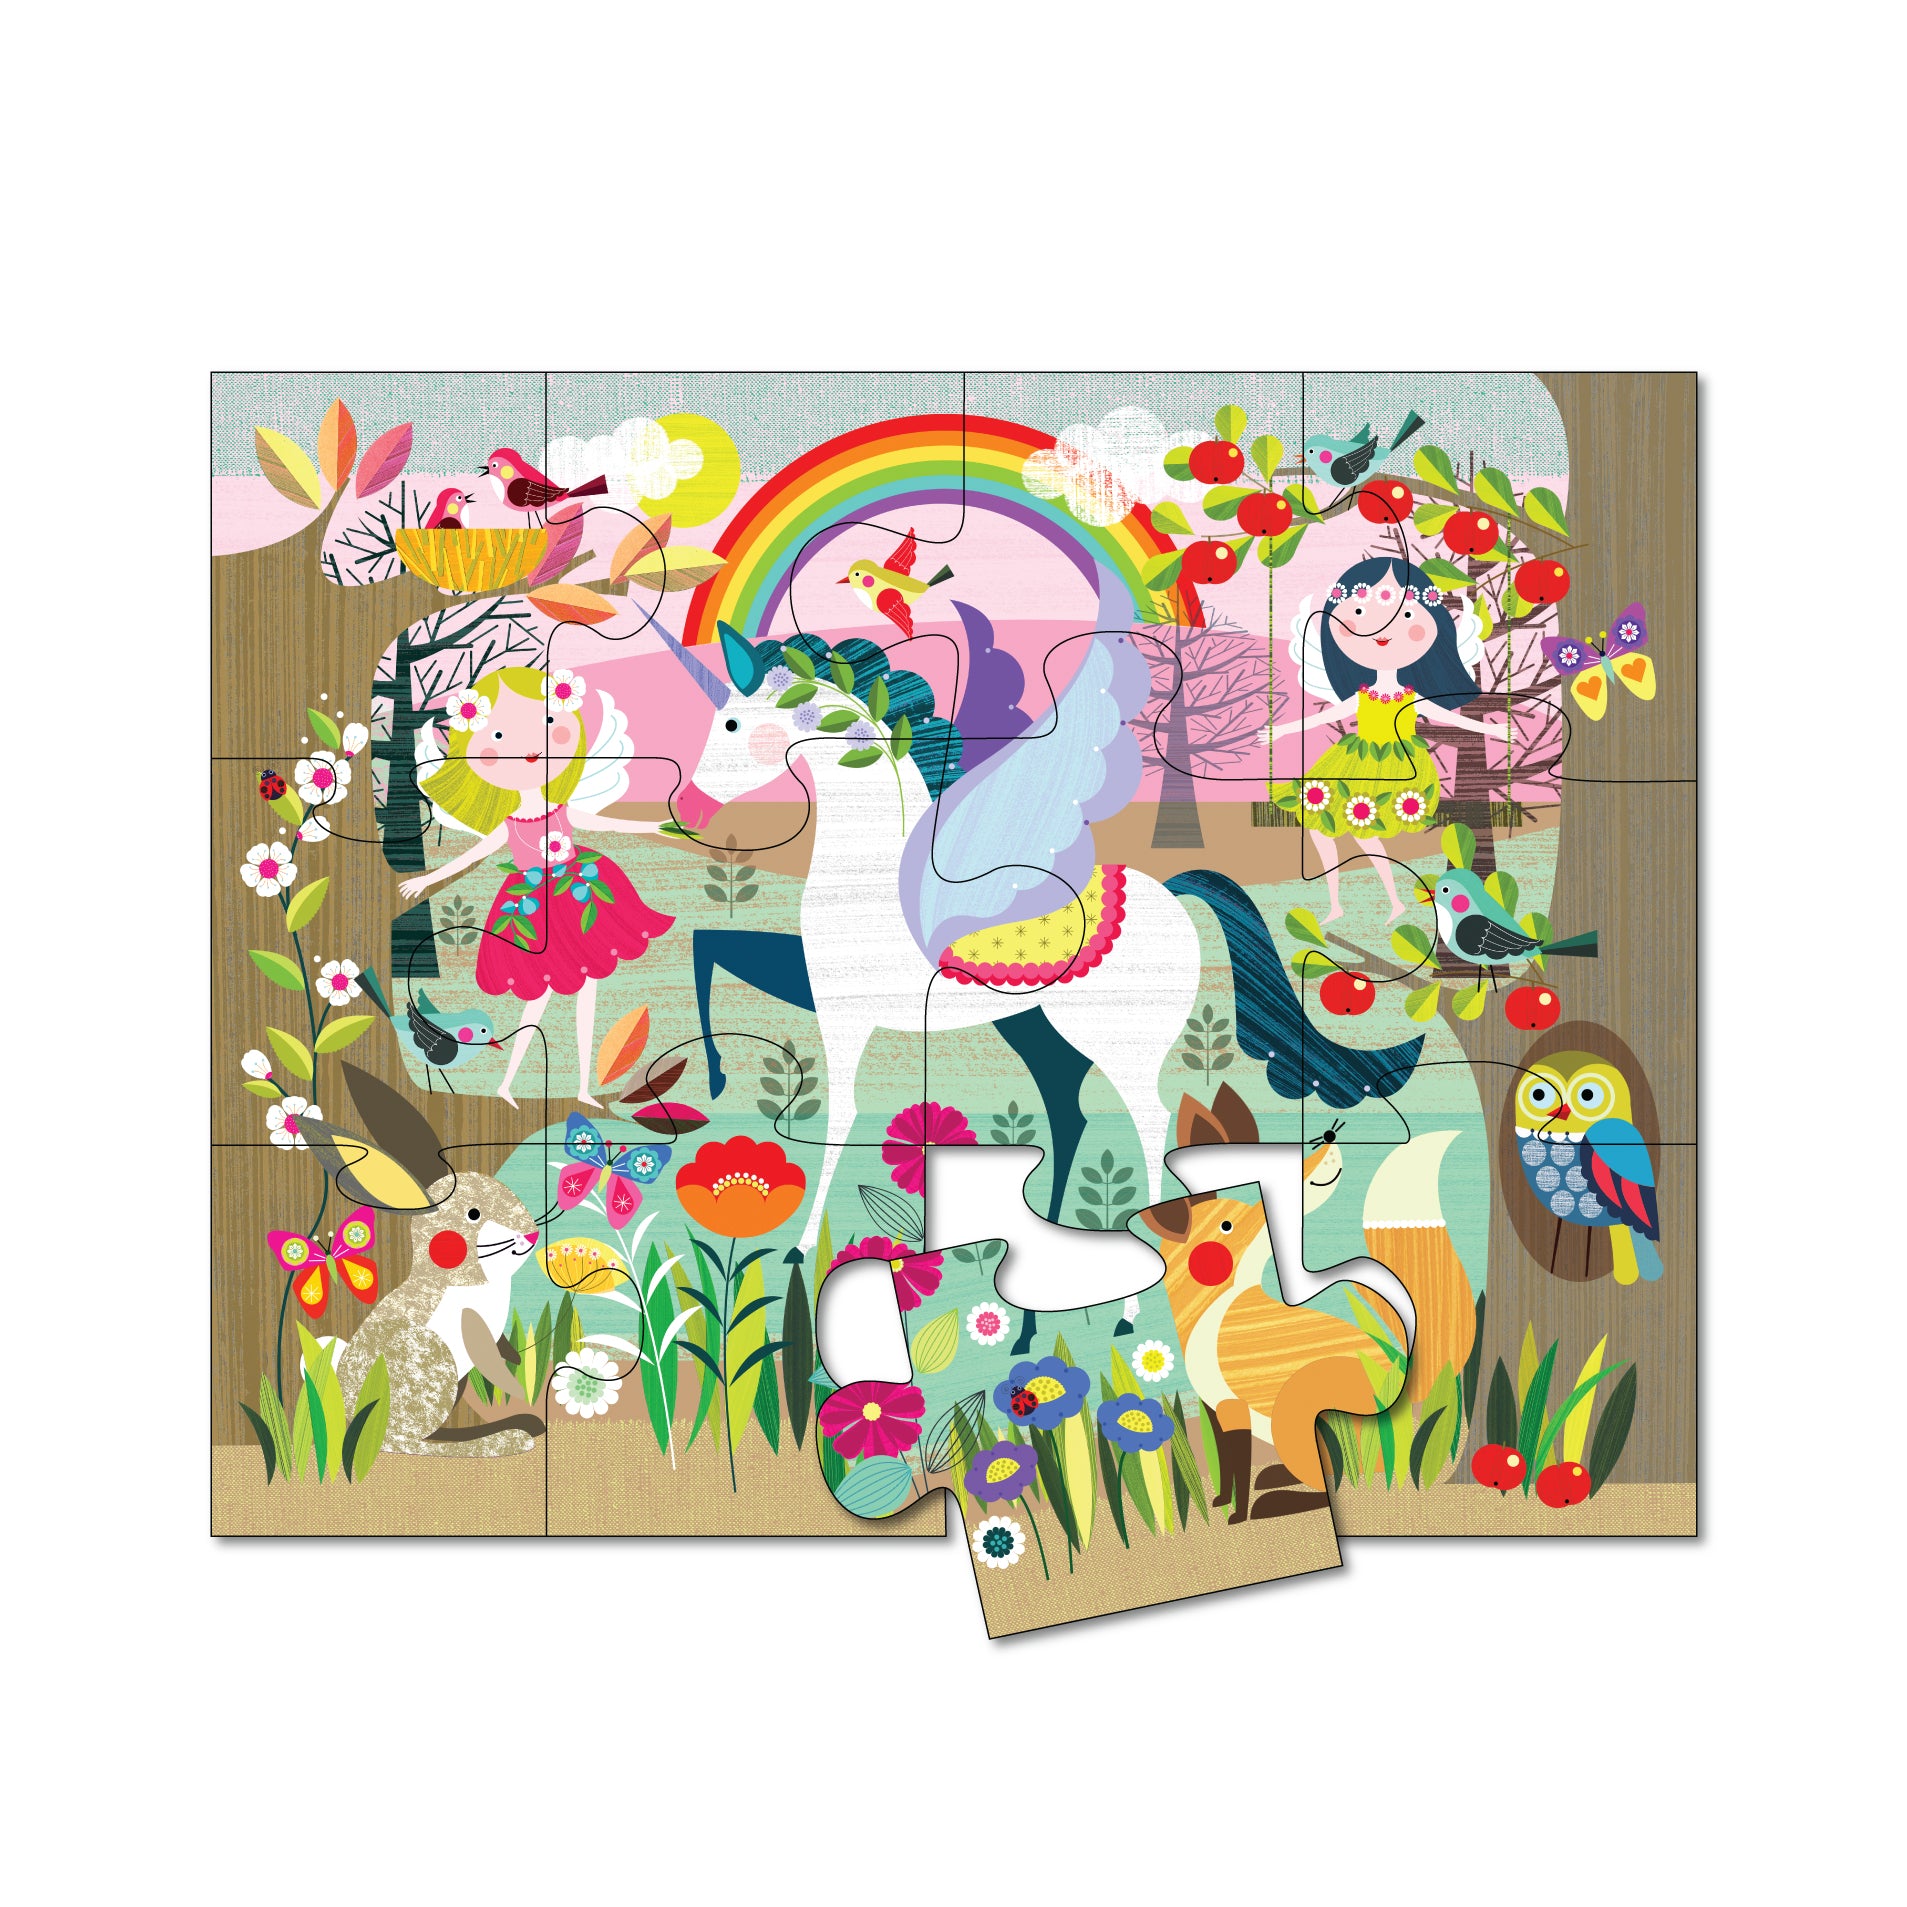 Enchanted World Of Unicorn + Circus Carnival - 37 Piece Puzzles